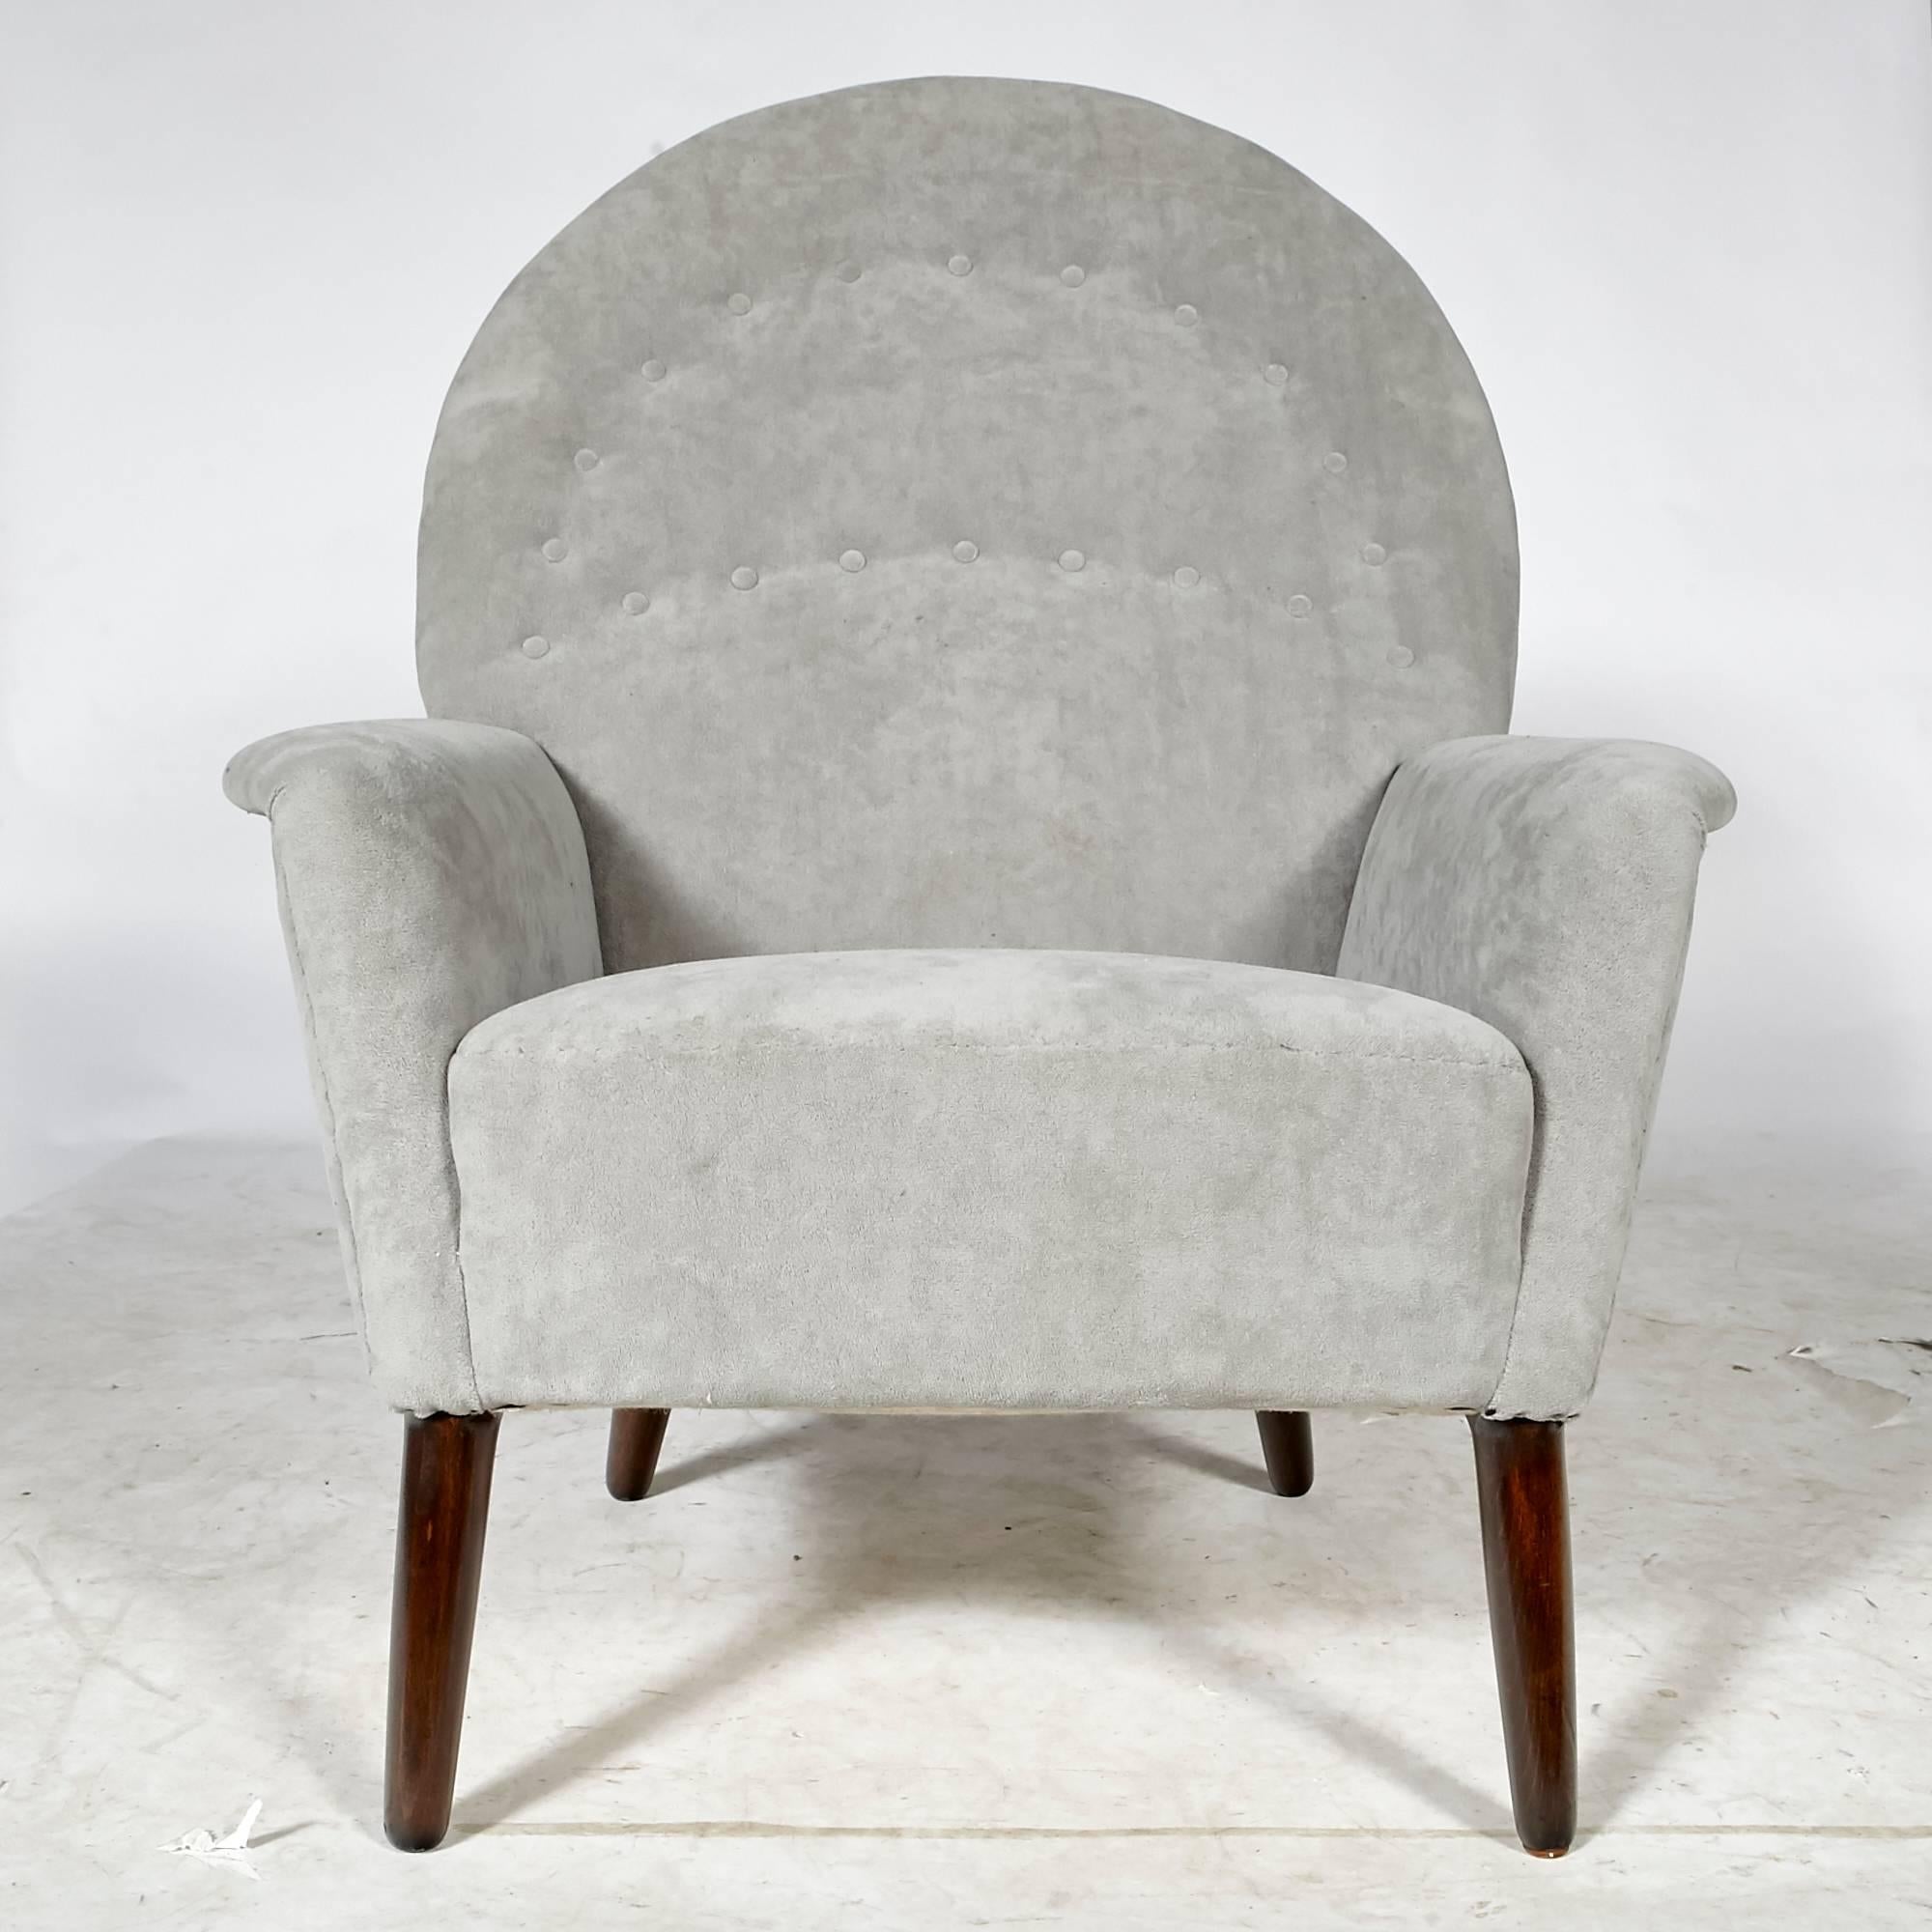 Vintage Scandinavian Modern Danish tufted lounge chair with a high rounded back and rosewood legs, circa 1960s. The chair fabric is in very good condition. Measure: Arm is 20.5in high.